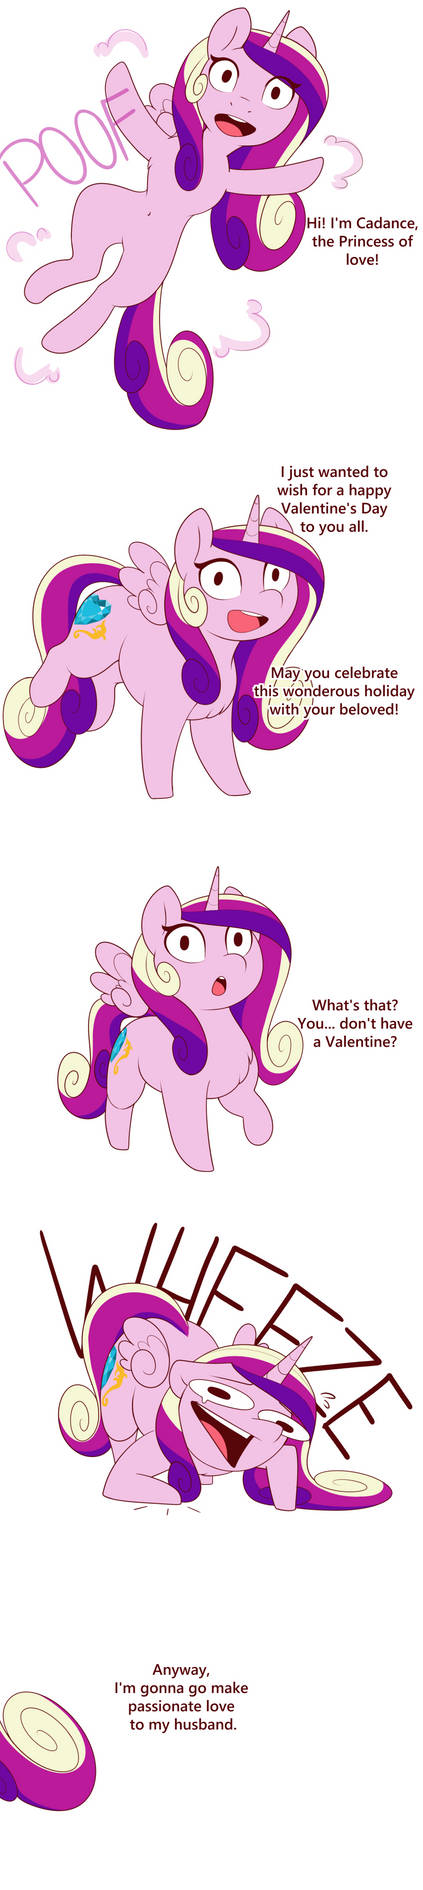 valentines_day_by_evehly_dczntgc-pre.jpg